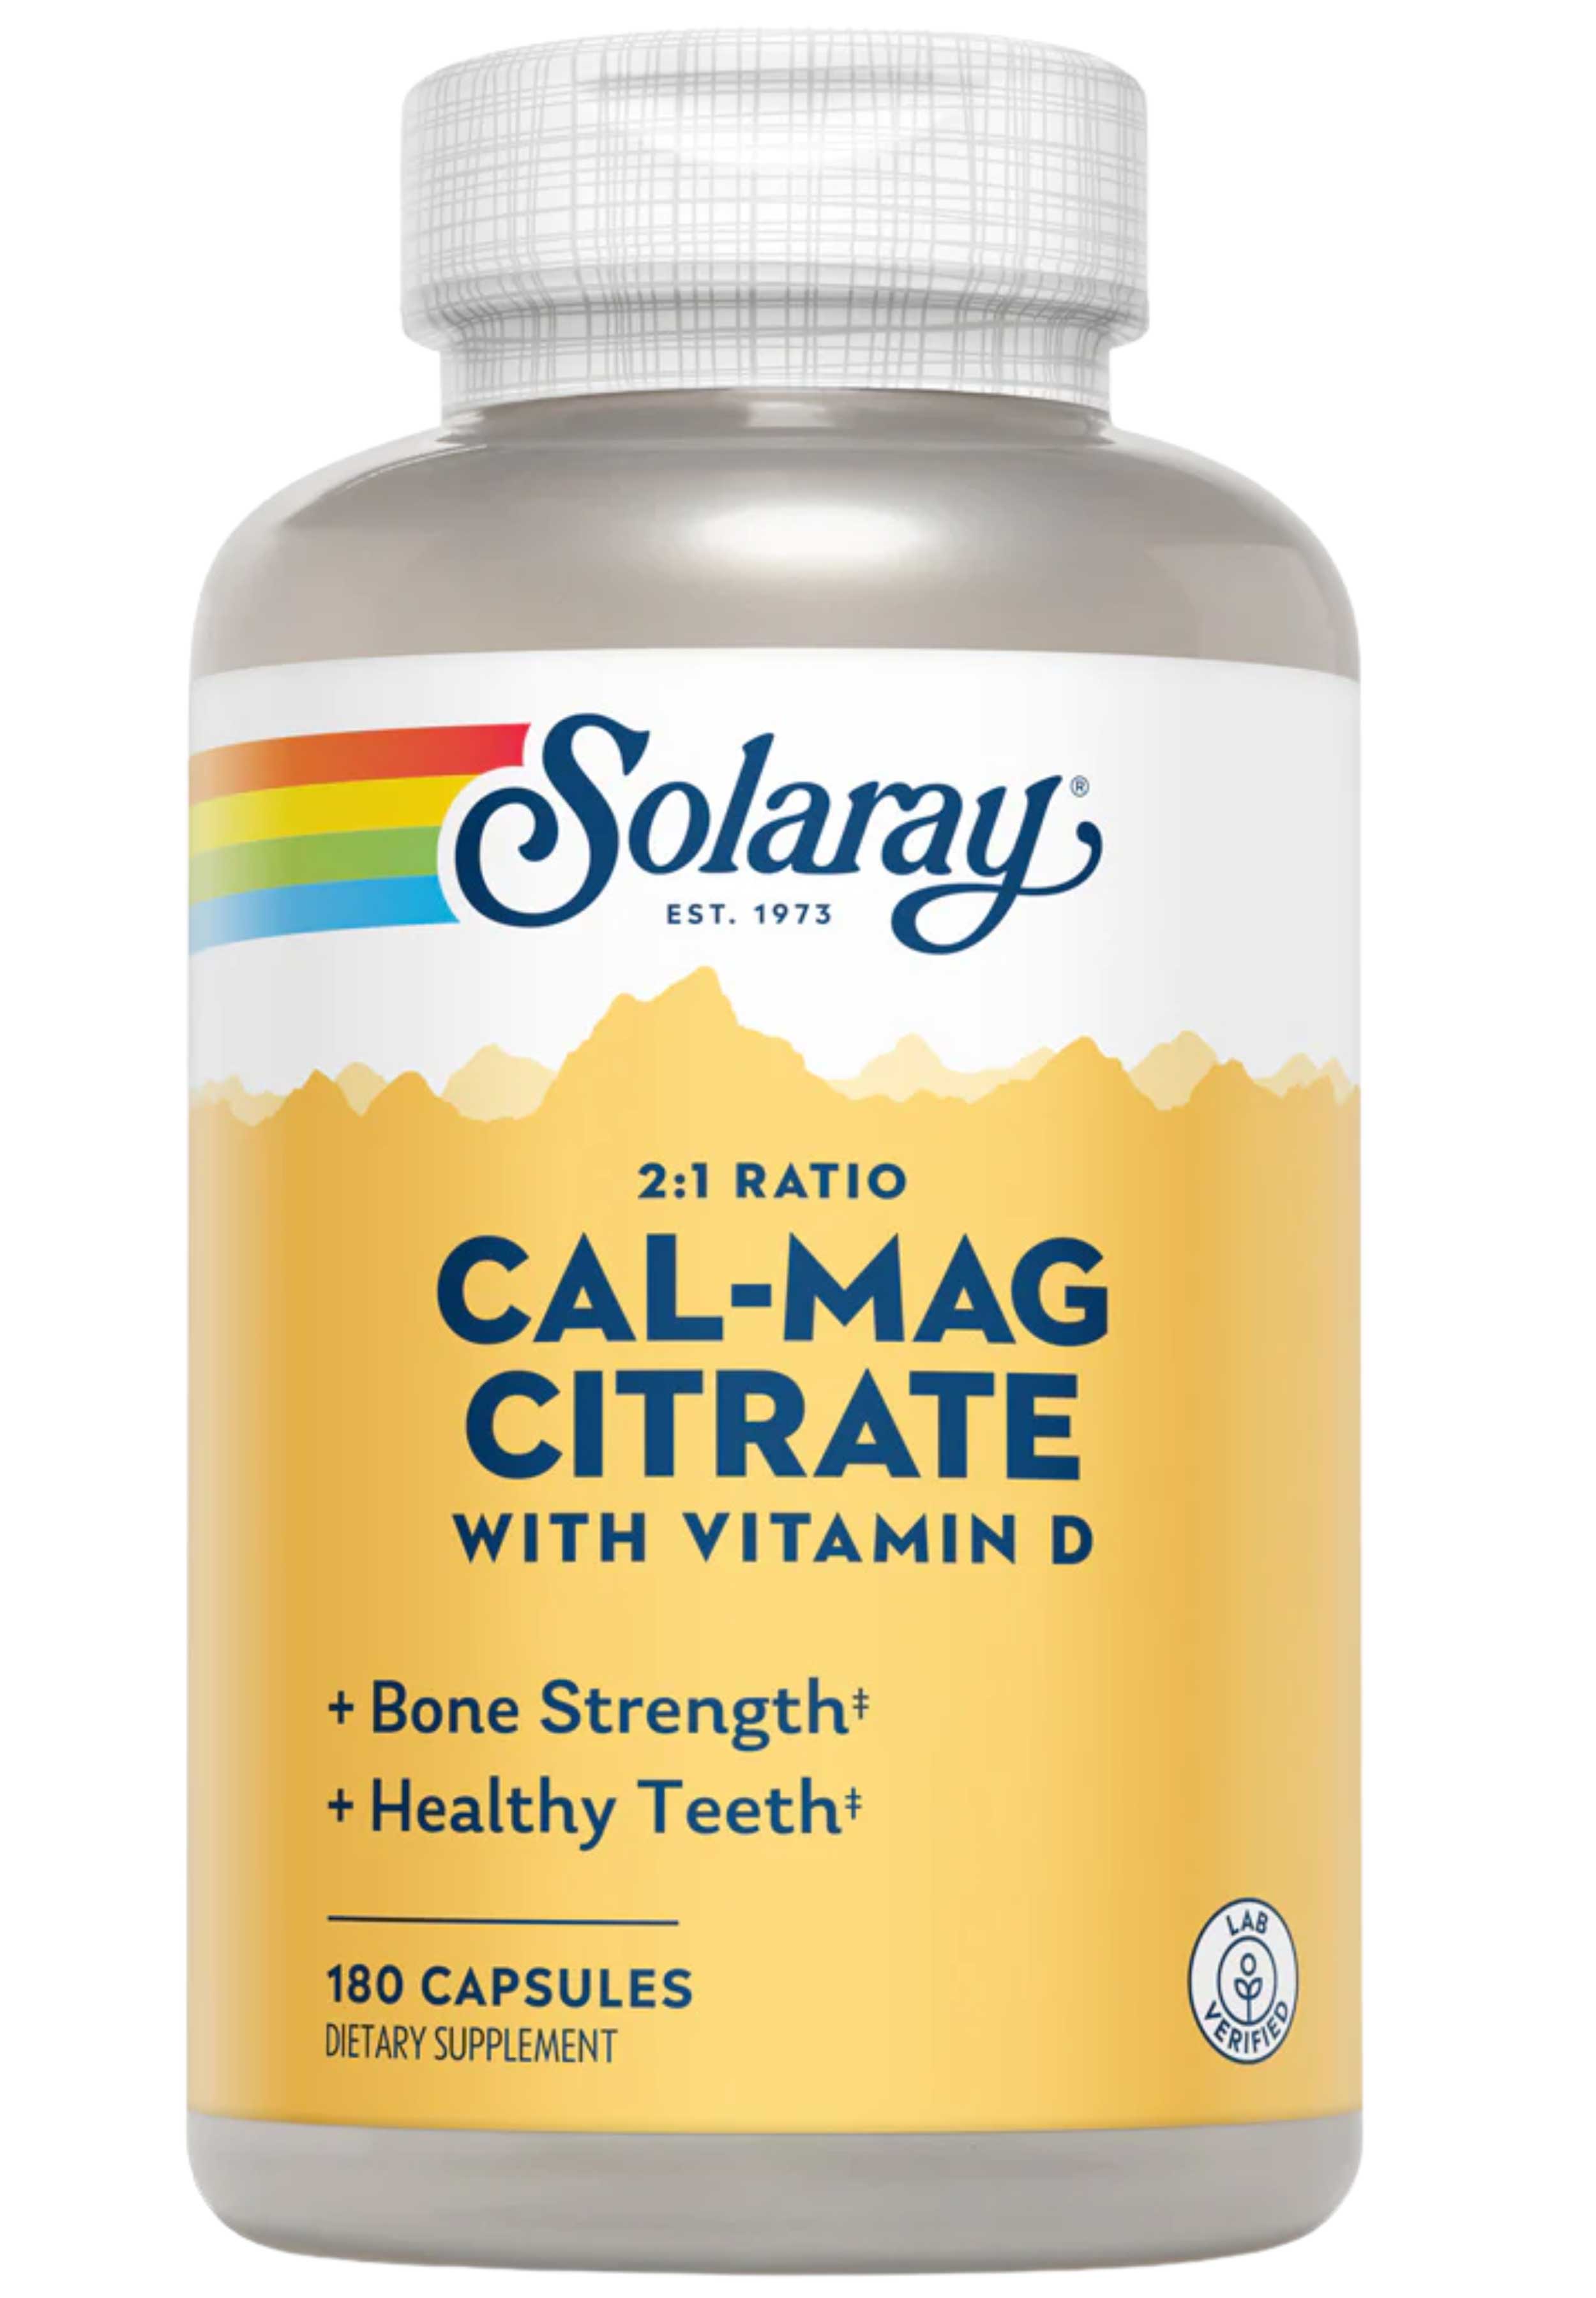 Solaray Cal-Mag Citrate with Vitamin D 2:1 Ratio